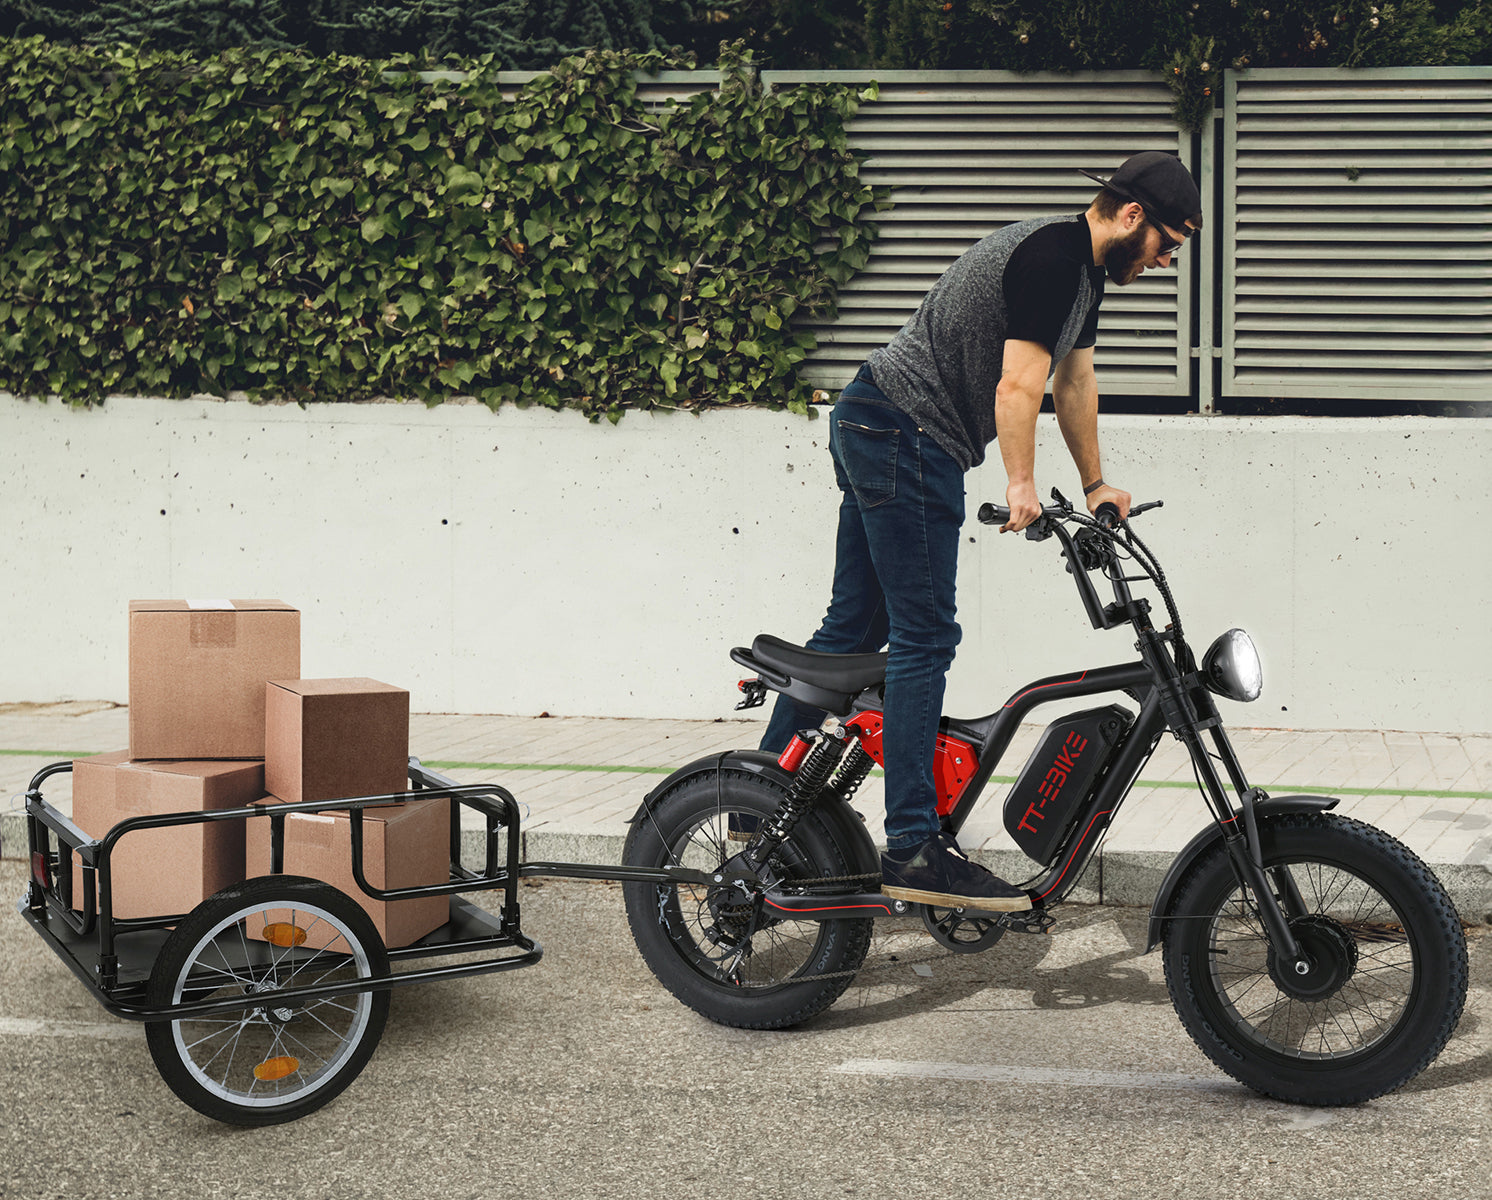 How to Choose the Best Cargo E-Bike for Your Family